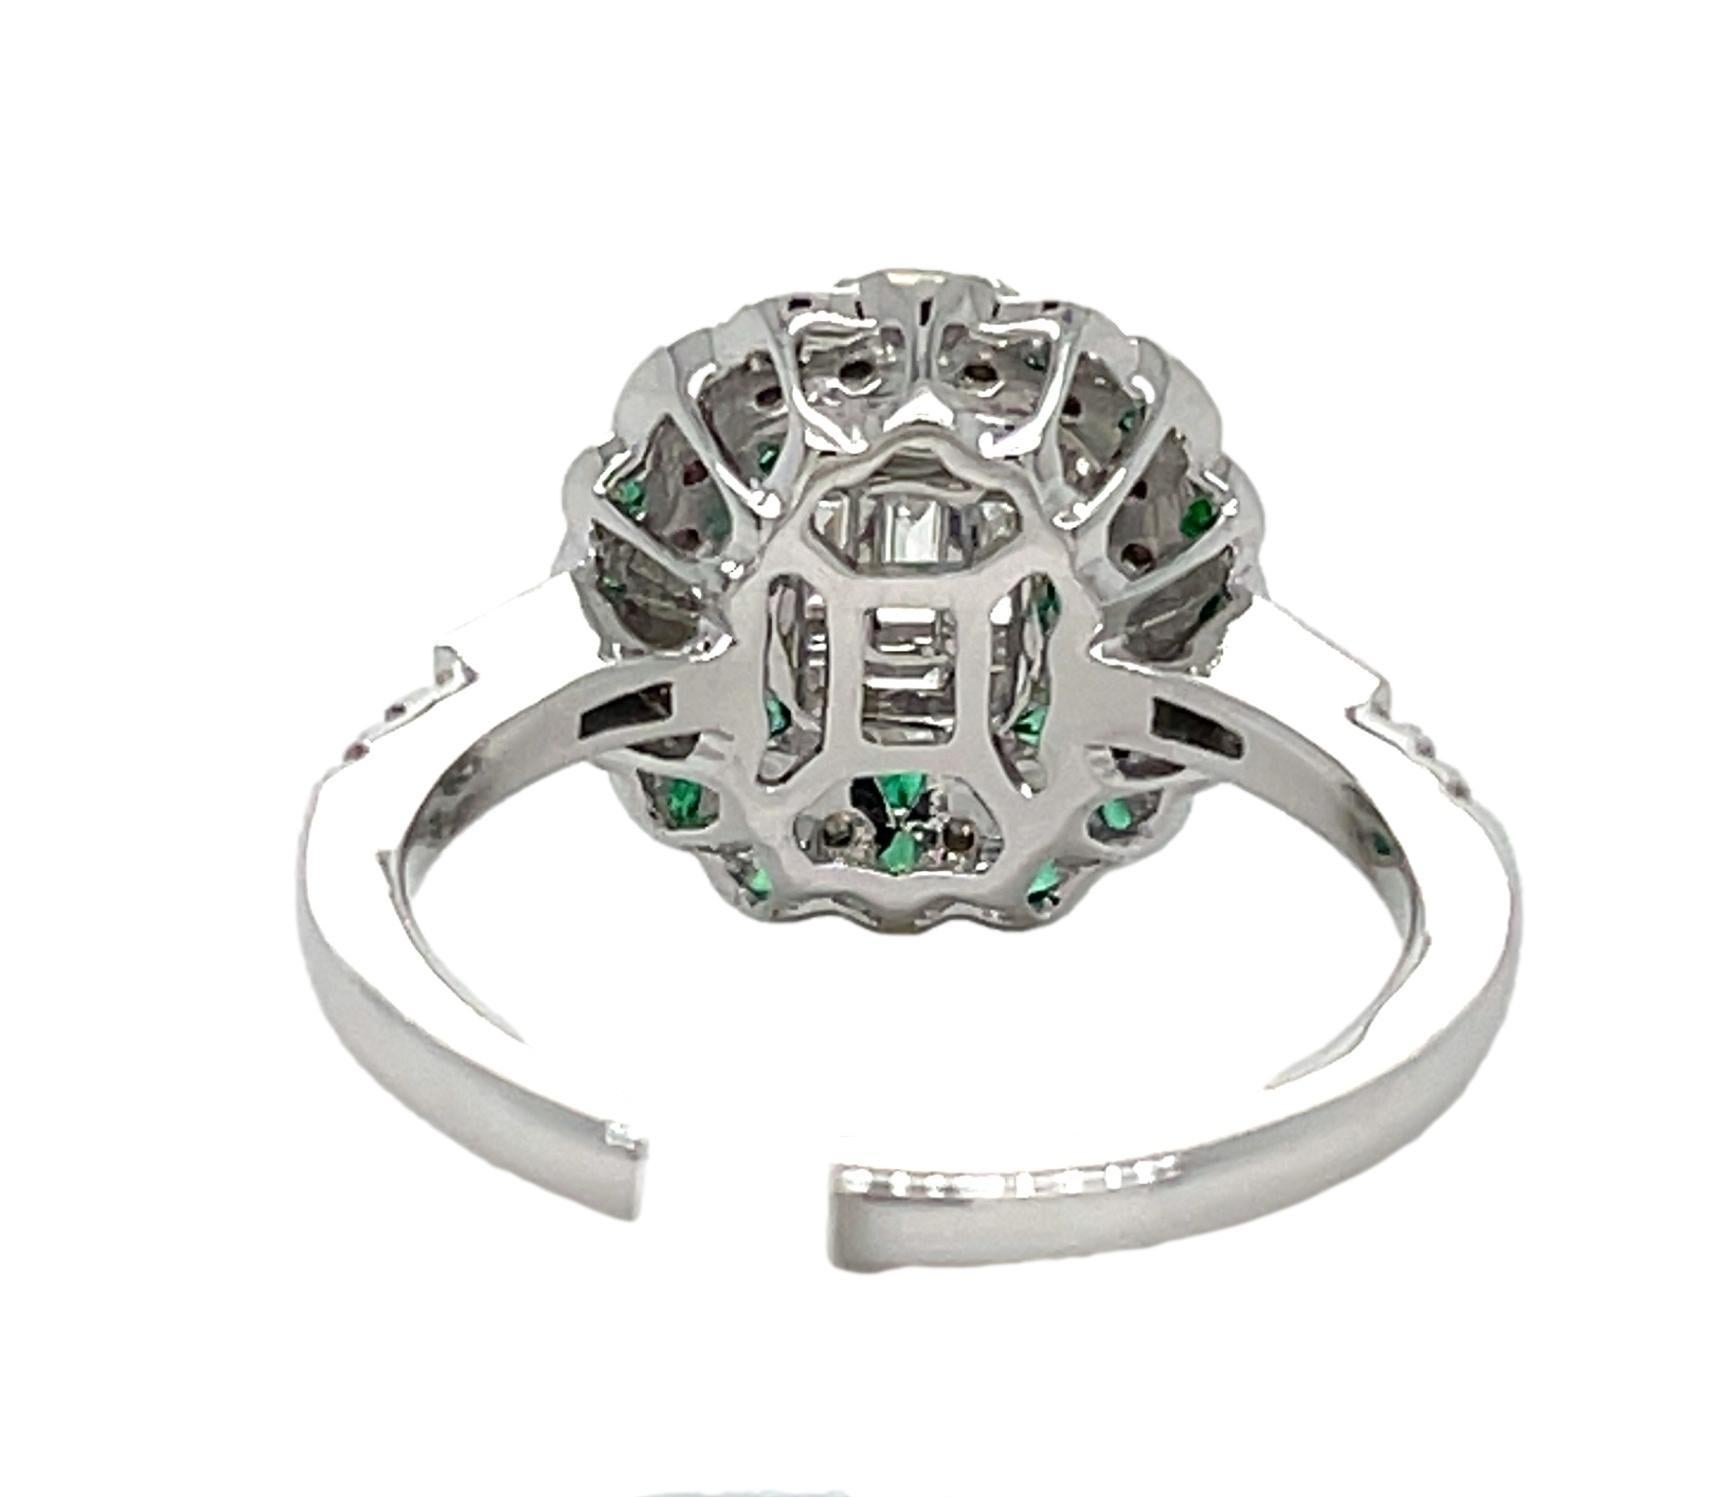 Baguette Cut Antique Emerald and Diamond Ring in 18k White Gold